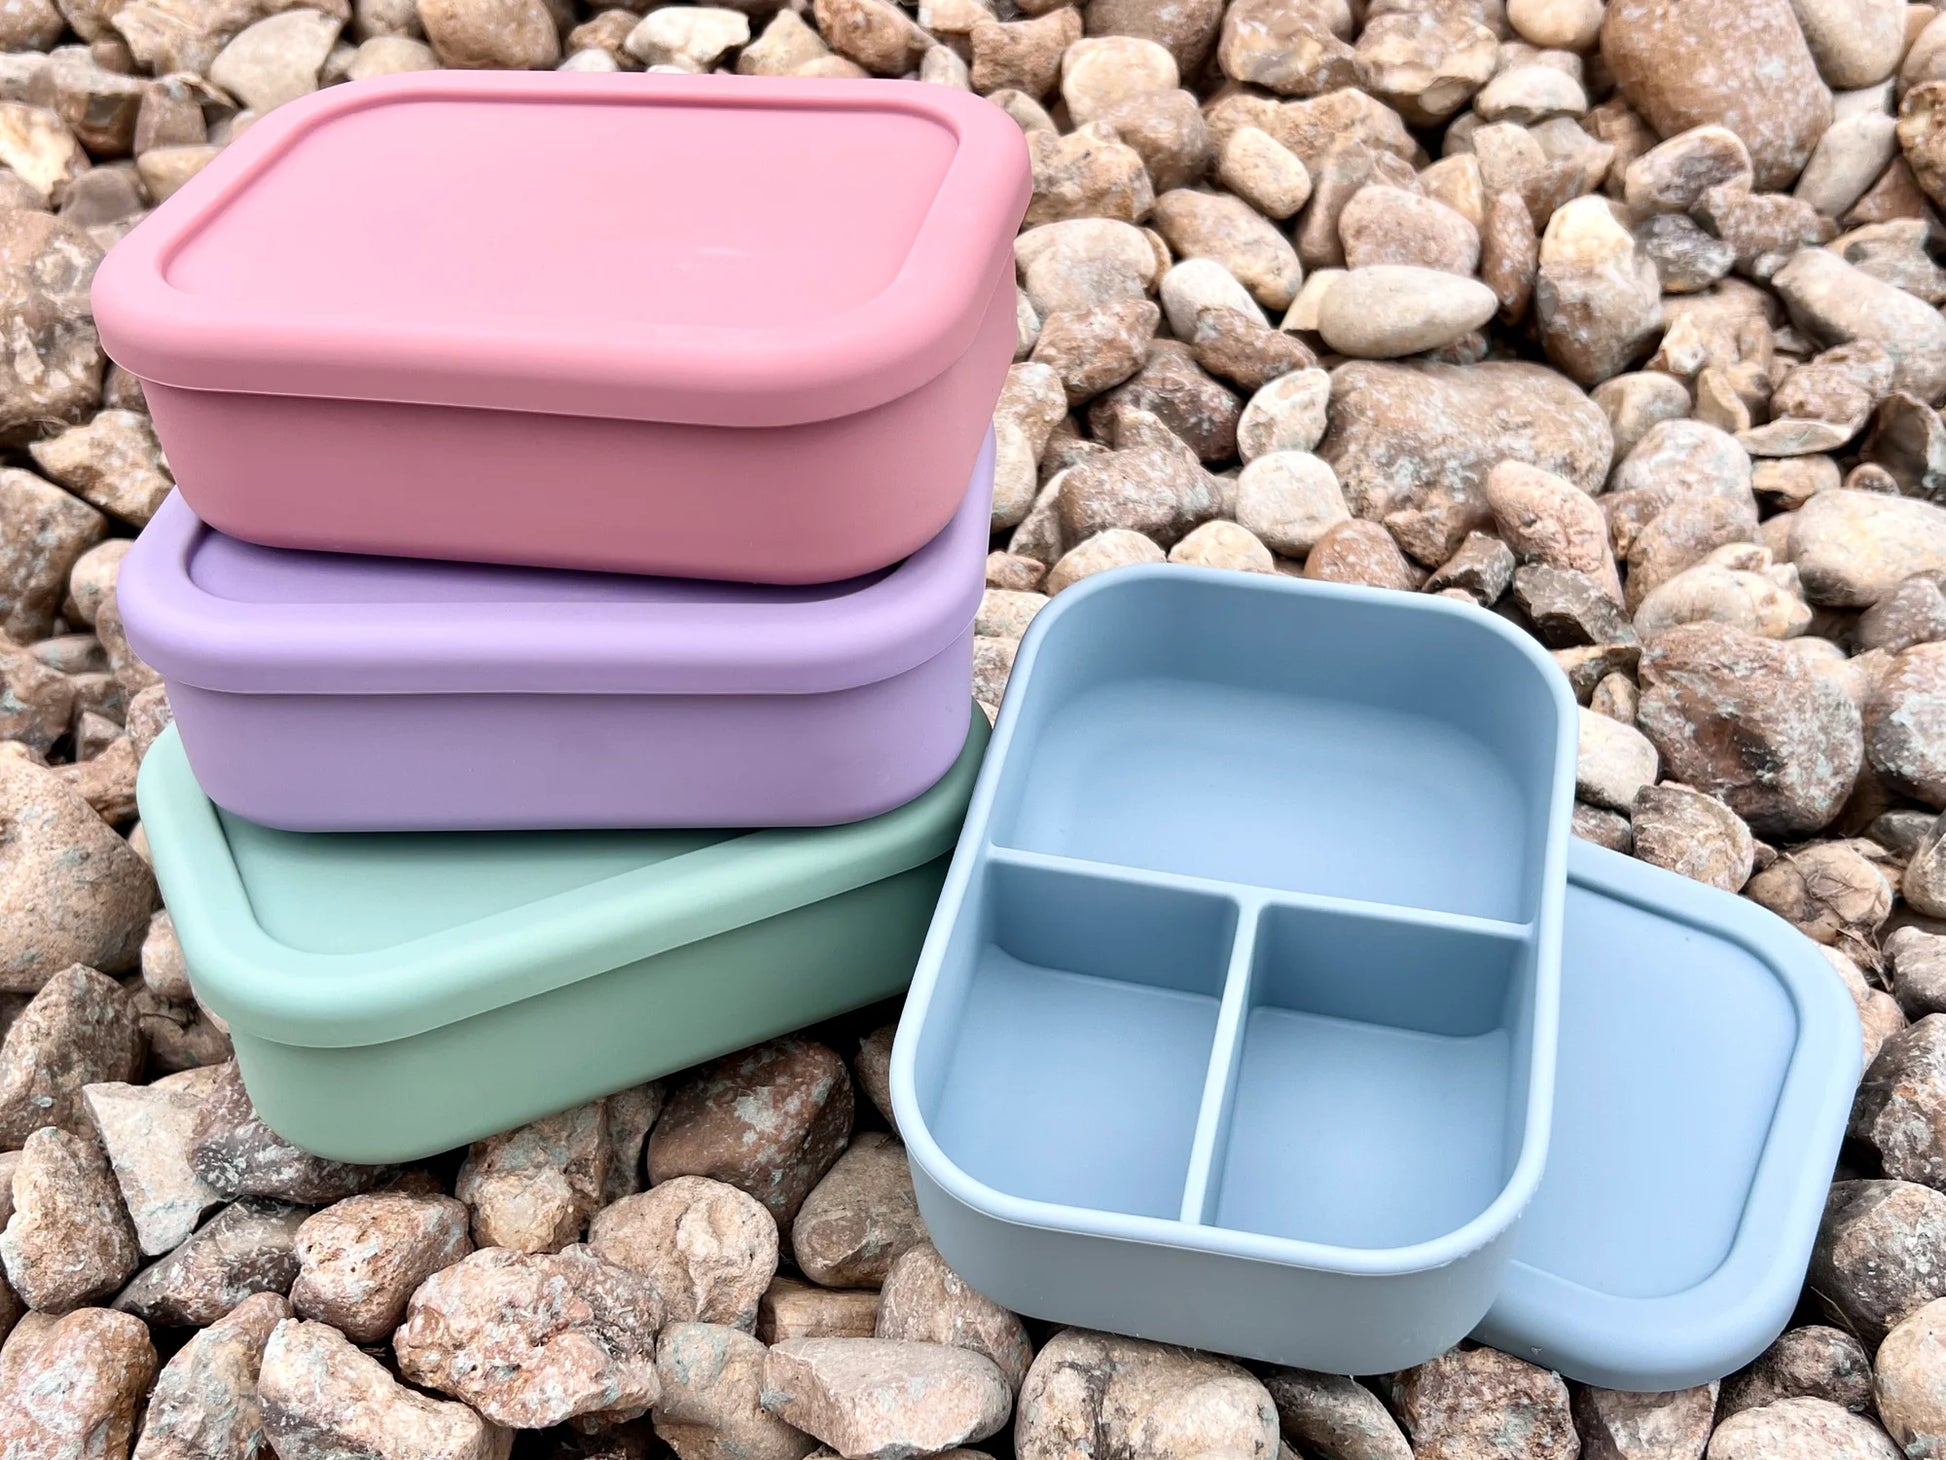 custom hot selling Food Grade silicone lunch box Portable Kids